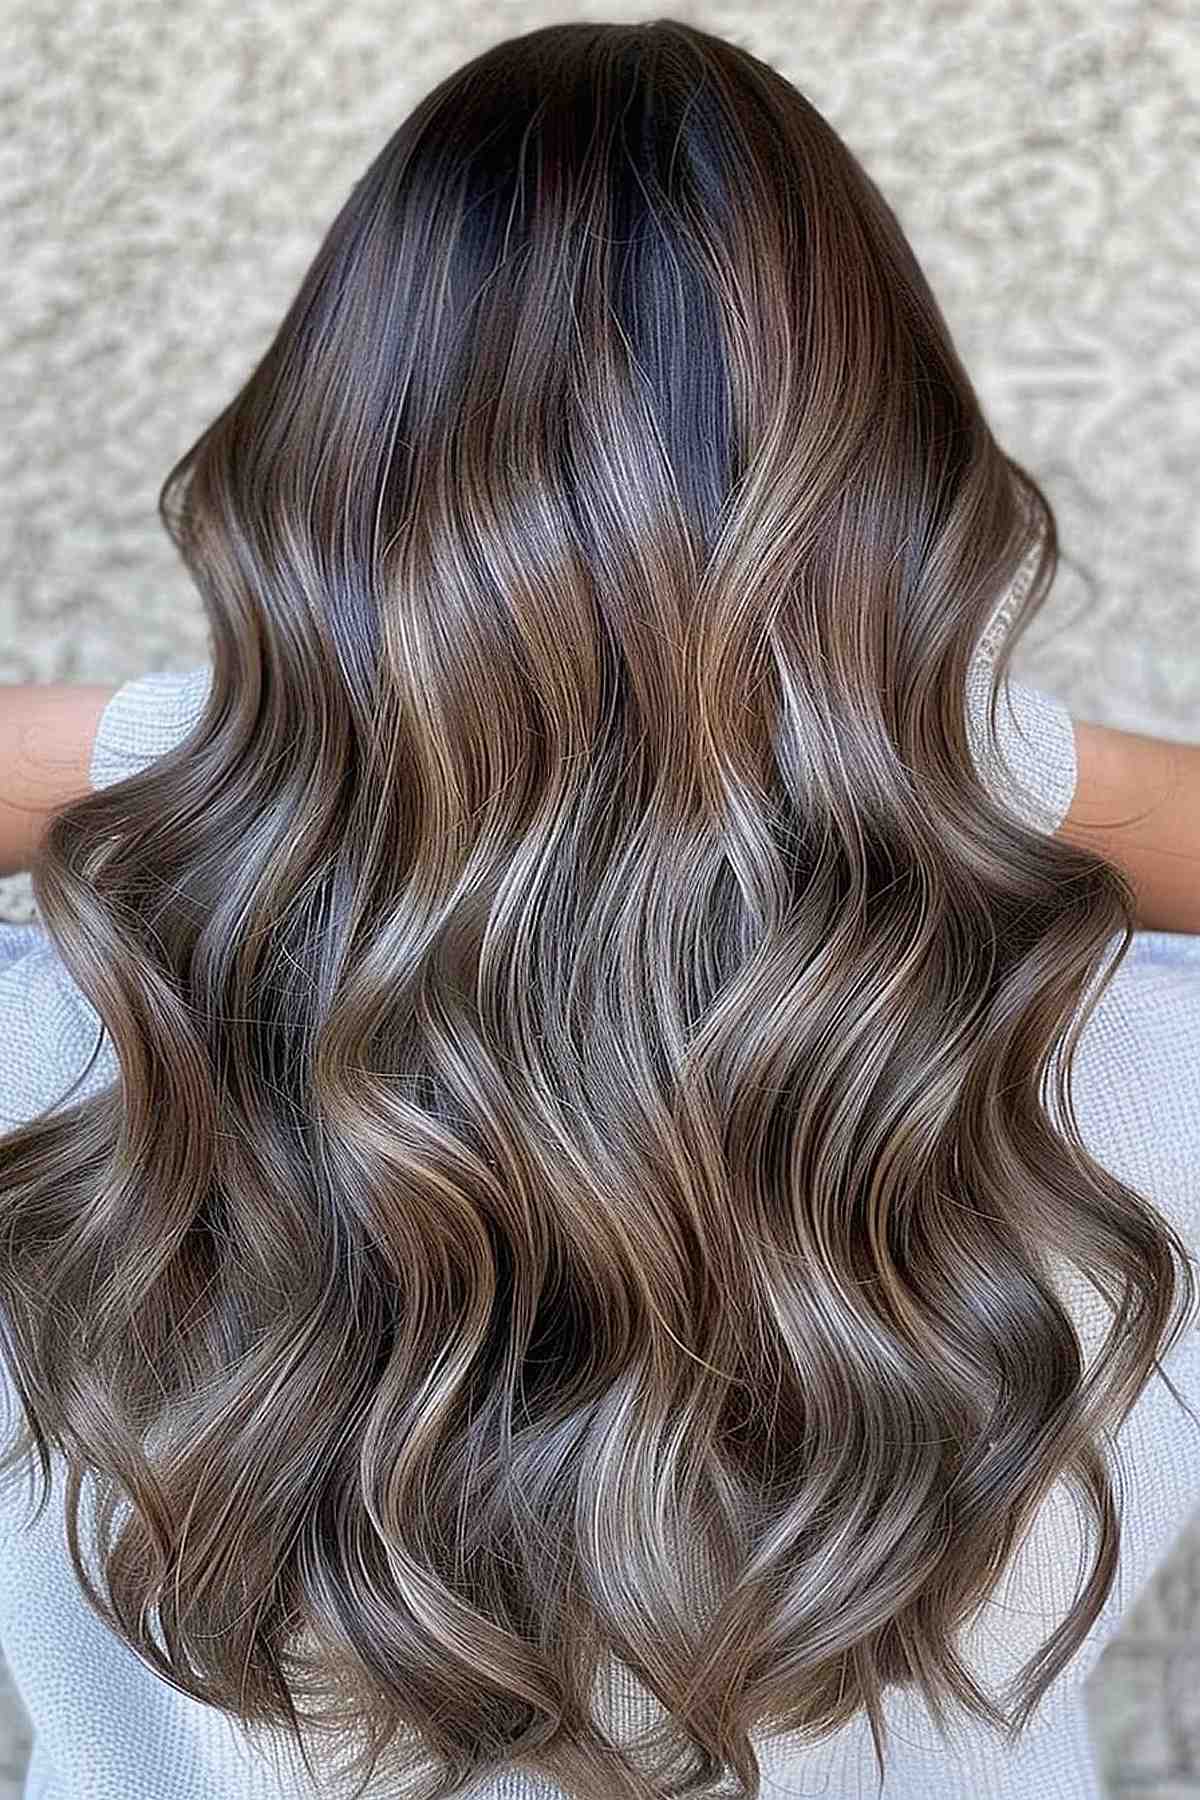 Luxurious waves in a mushroom brown balayage ombre, with colors transitioning from deep roots to lighter ends, adding dimension and volume.